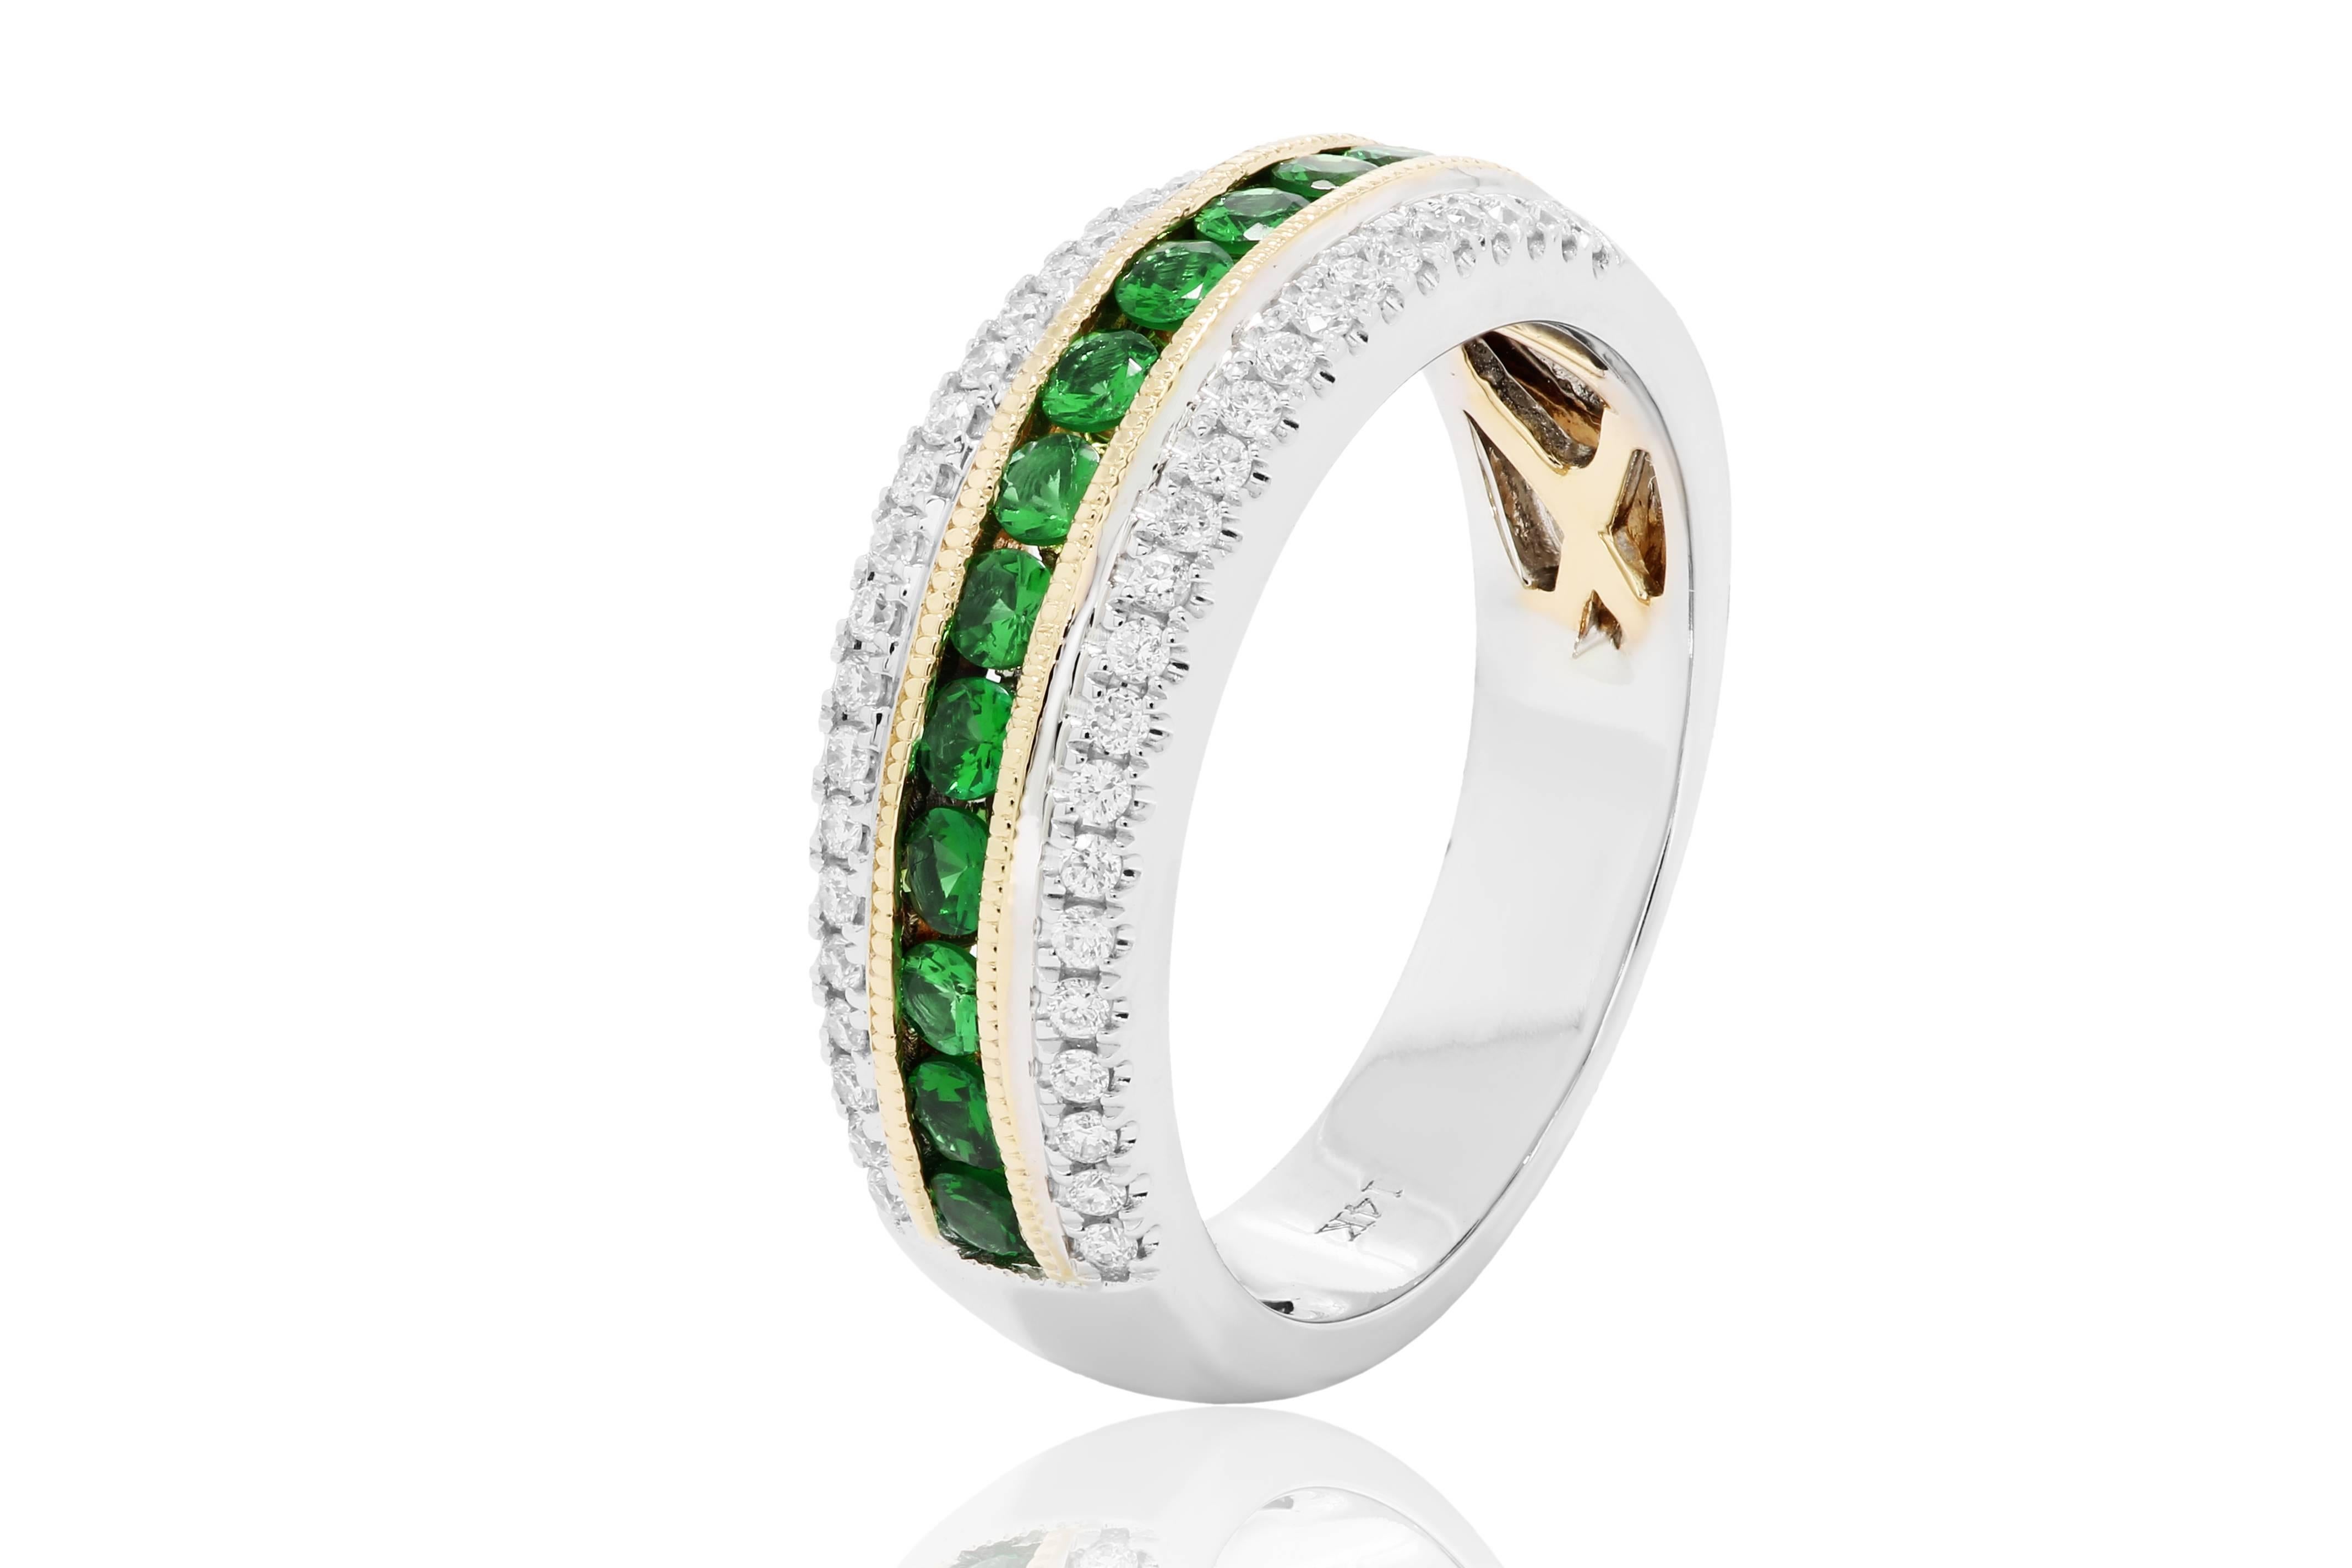 13 Tsavorite Garnet Rounds 0.50 Carat Set in Channel Flanked by Two Row of Diamonds 0.23 Carat in 14K White and Yellow Gold Cocktail Fashion Band Ring .

Tsavorite Round Weight 0.50 Carat
Total Stone Weight  0.73 Carat